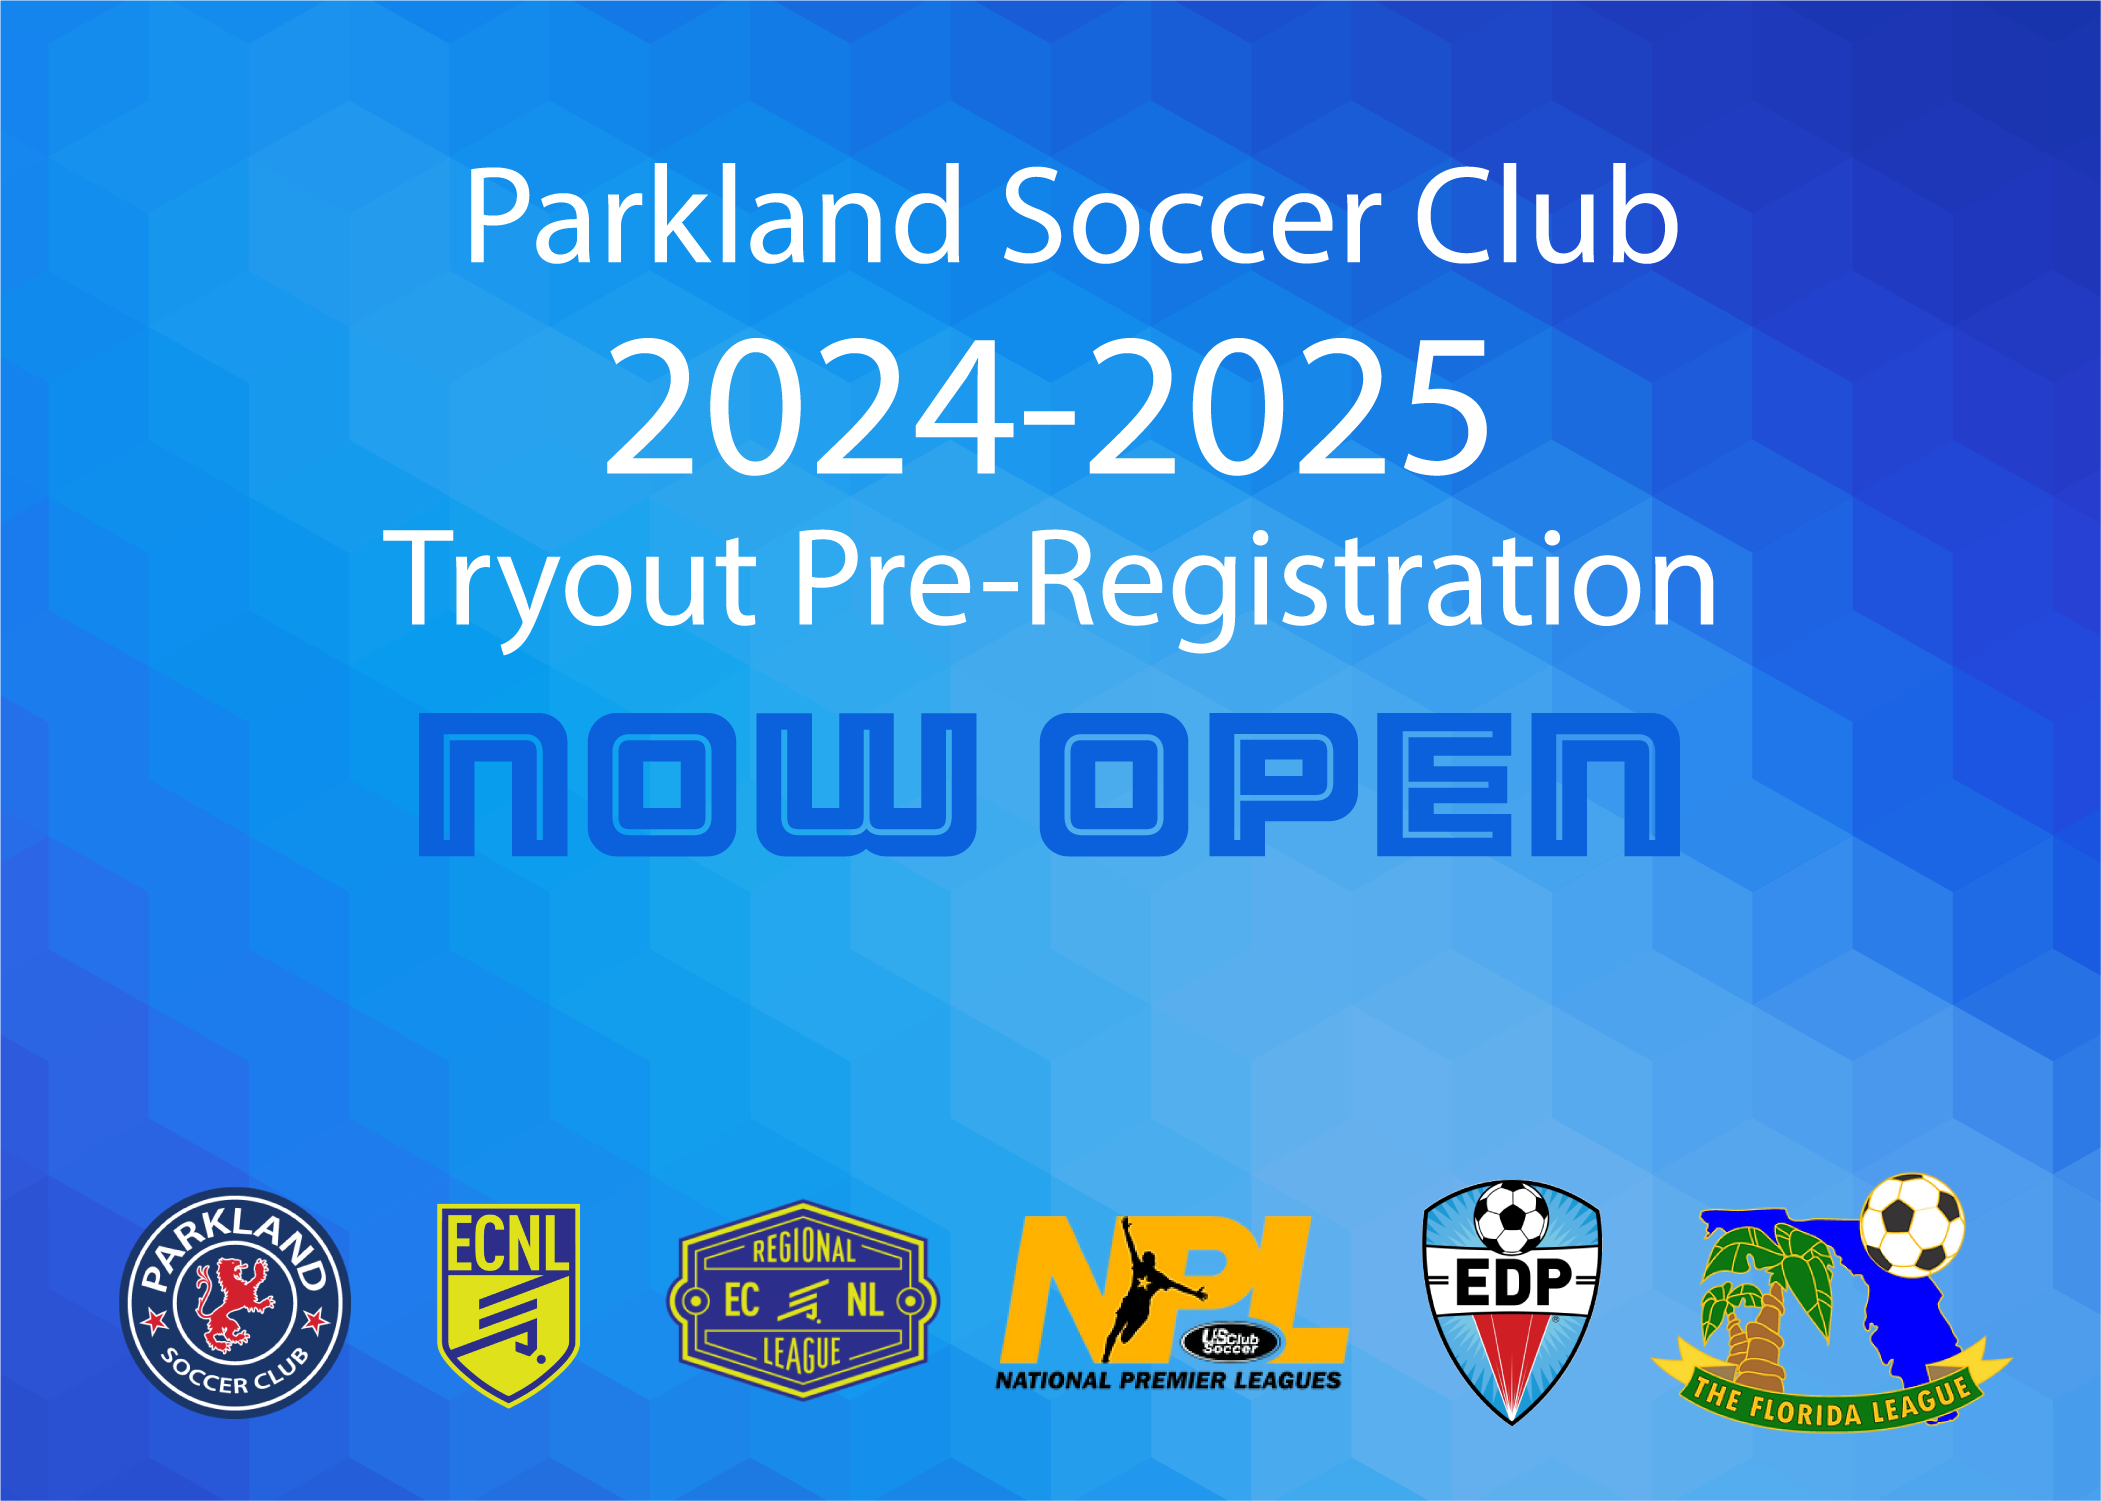 PARKLAND SOCCER CLUB TRYOUTS REGISTRATION NOW OPEN